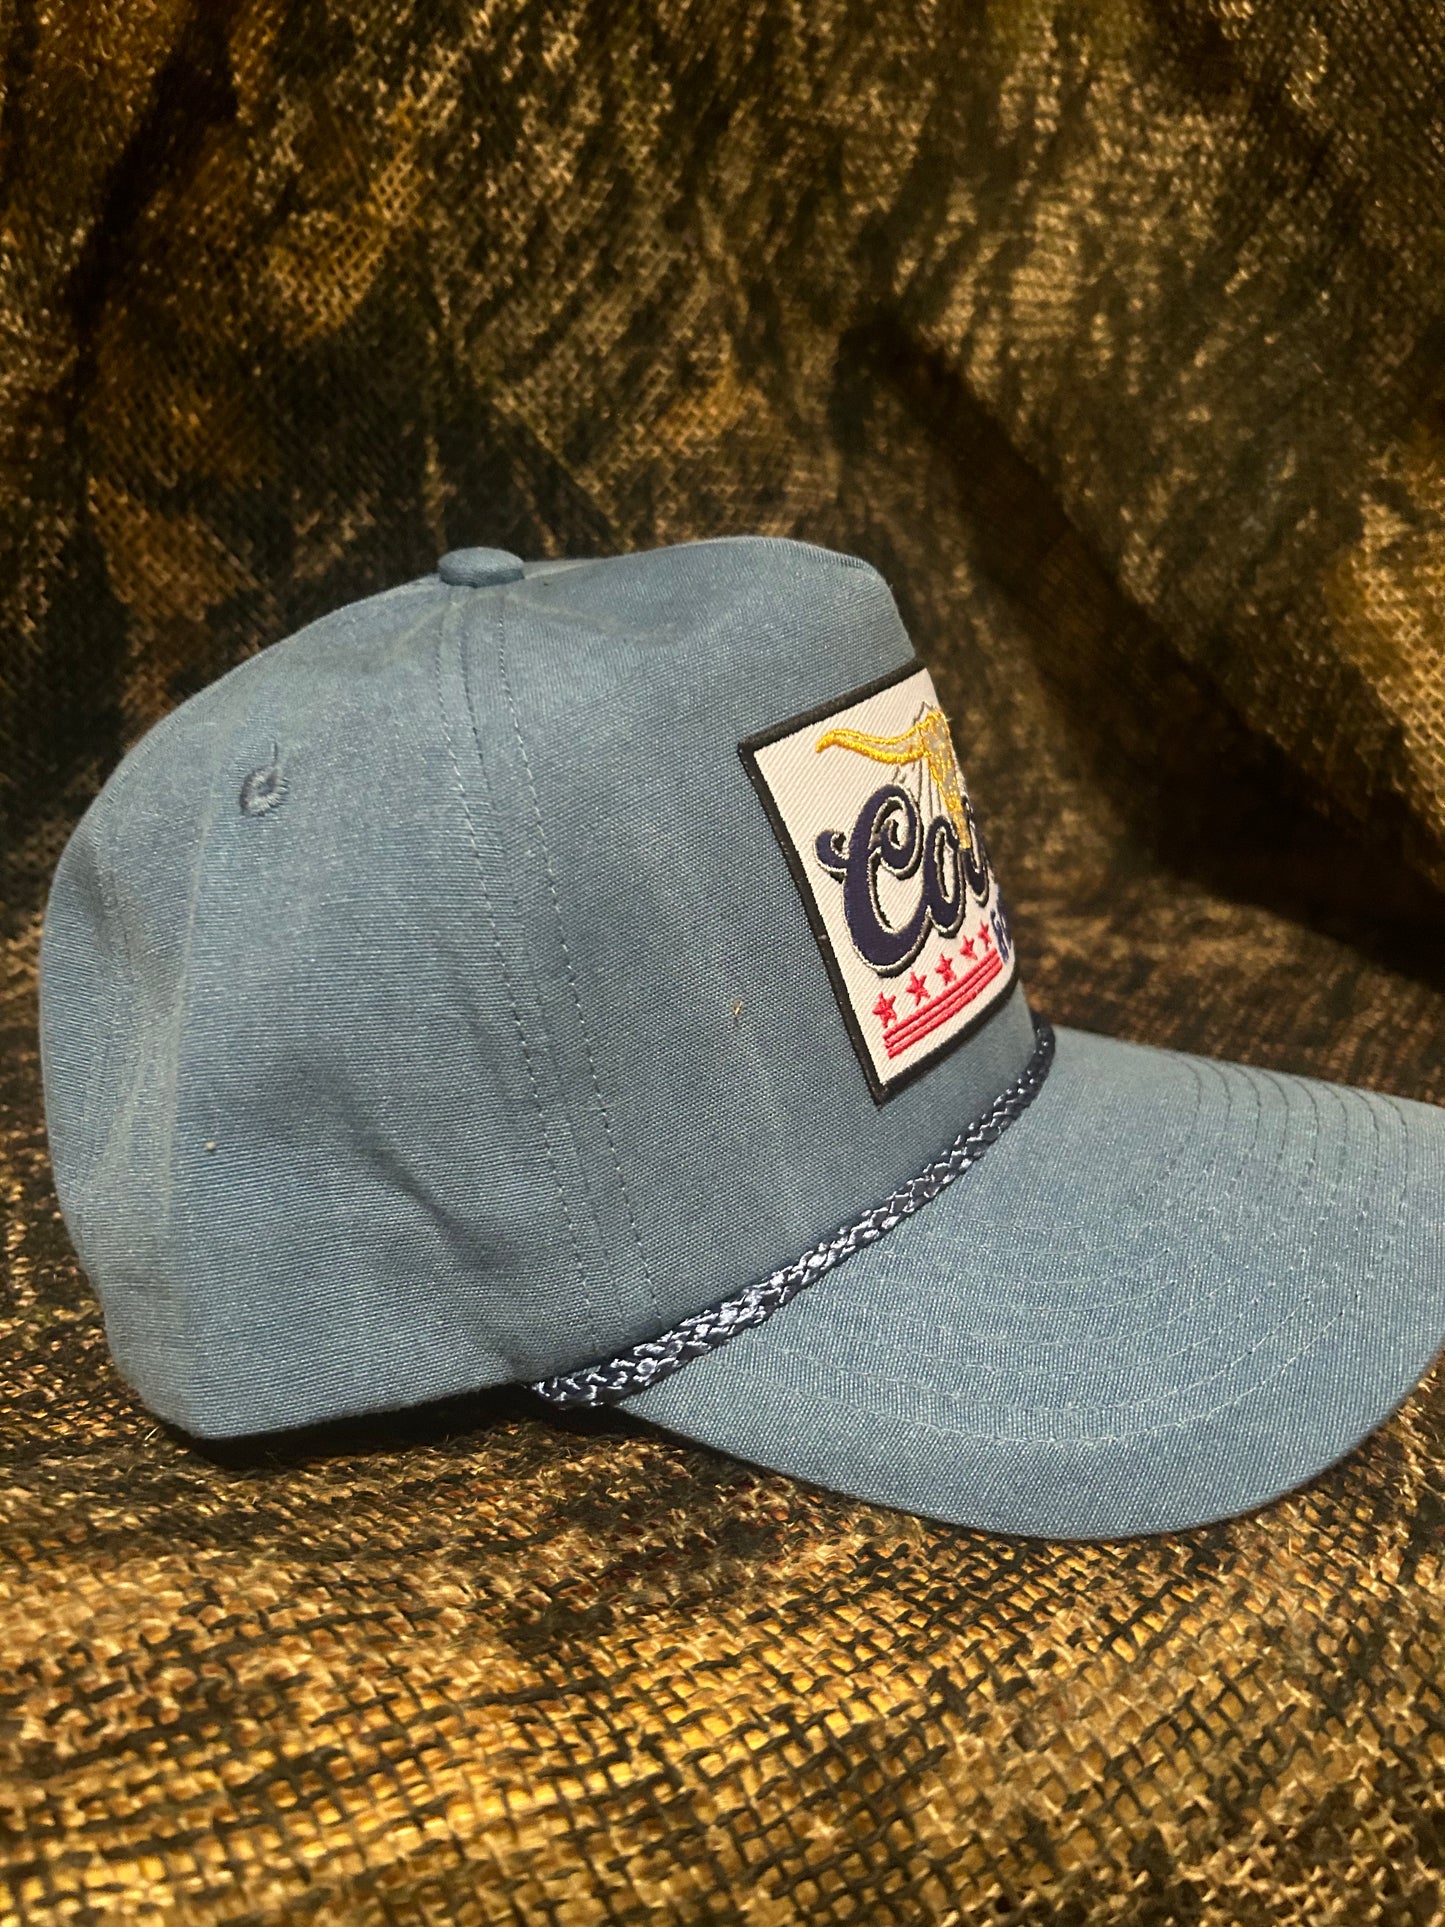 Coors & Cattle baby blue SnapBack hat